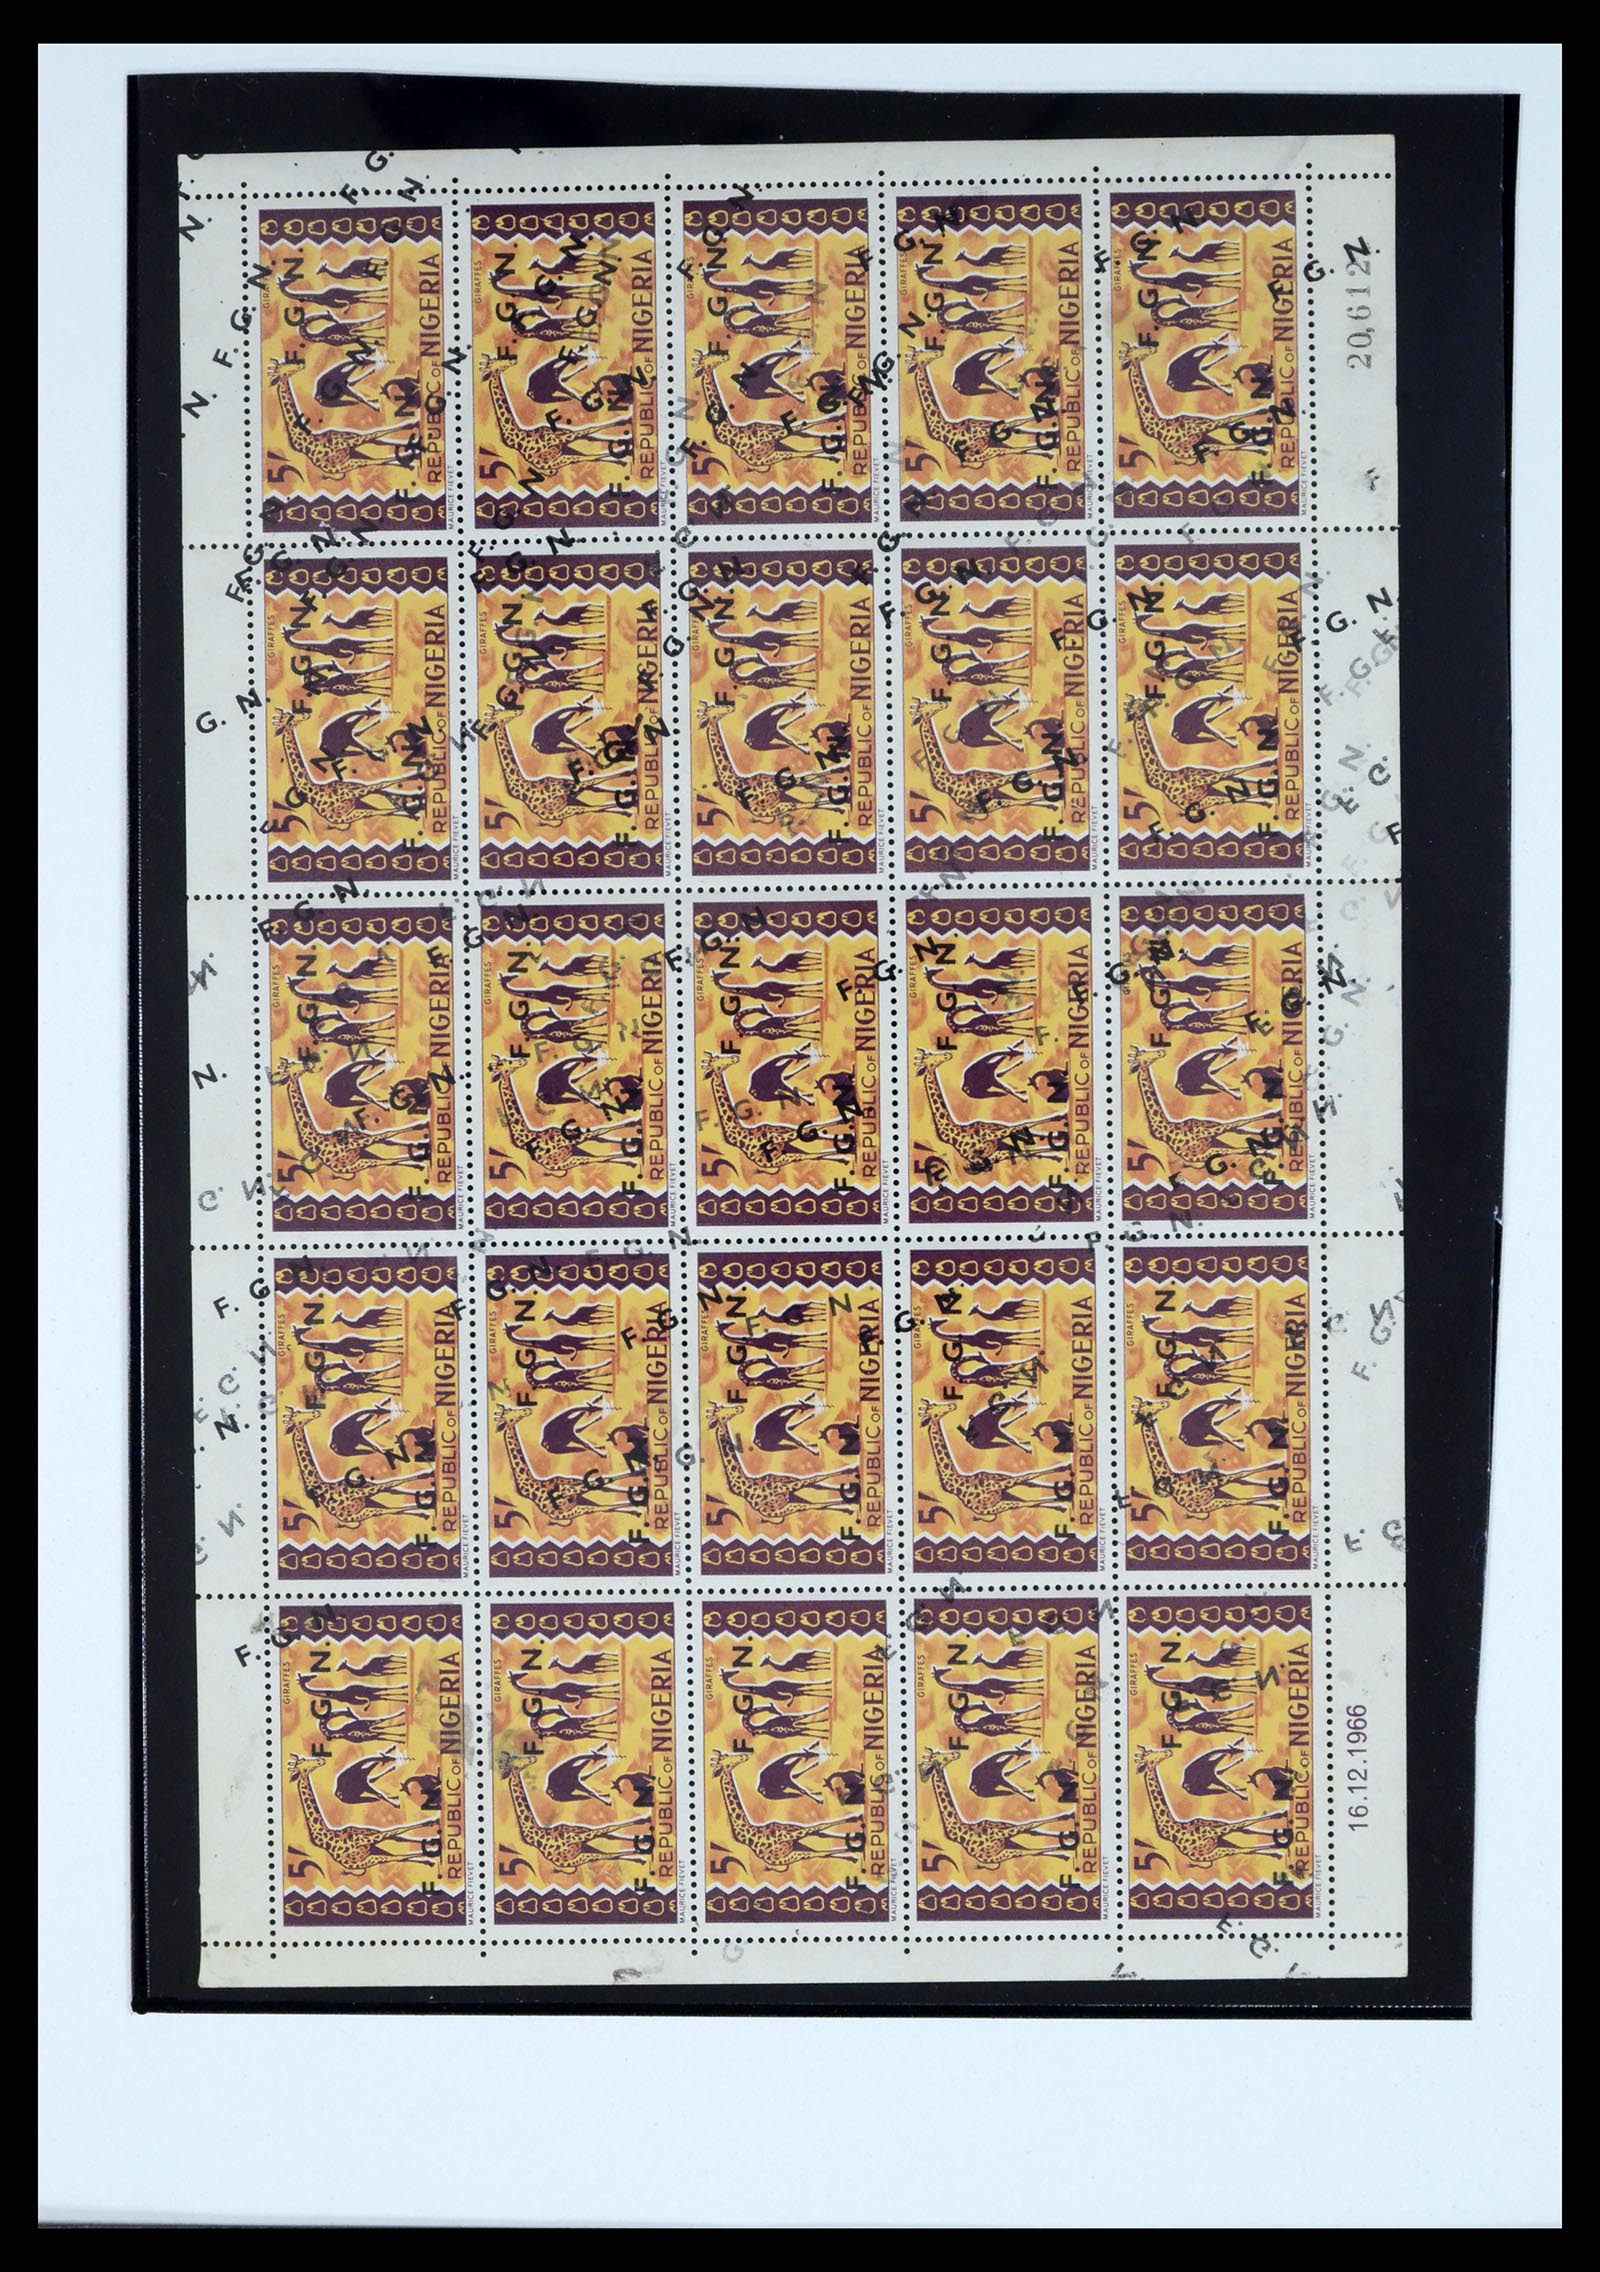 37678 009 - Stamp collection 37678 Nigeria FGN 1968.